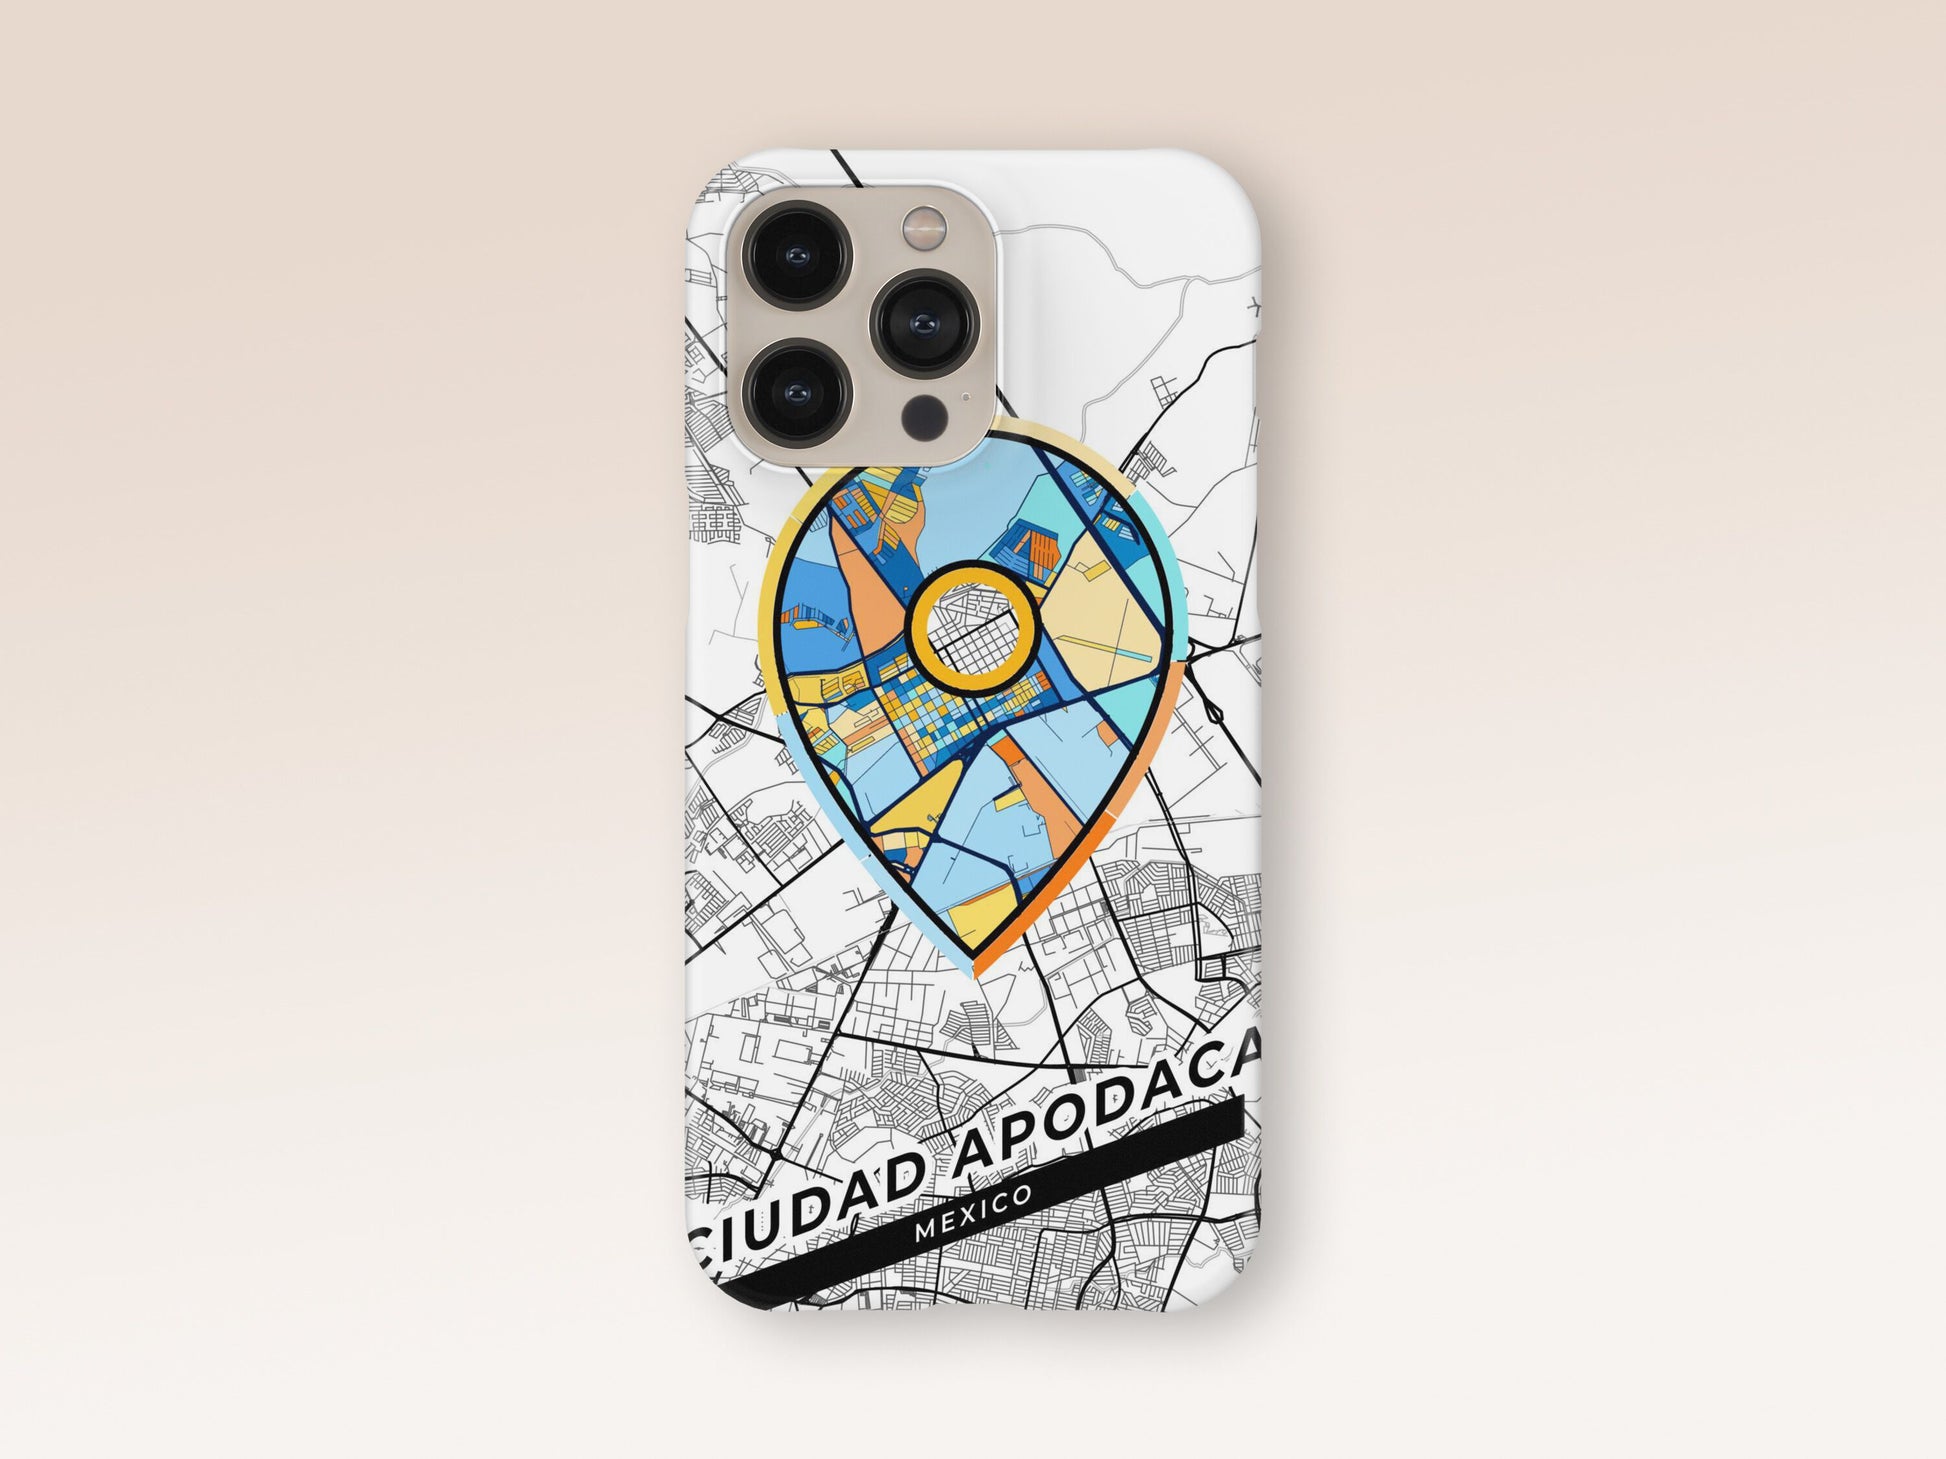 Ciudad Apodaca Mexico slim phone case with colorful icon. Birthday, wedding or housewarming gift. Couple match cases. 1